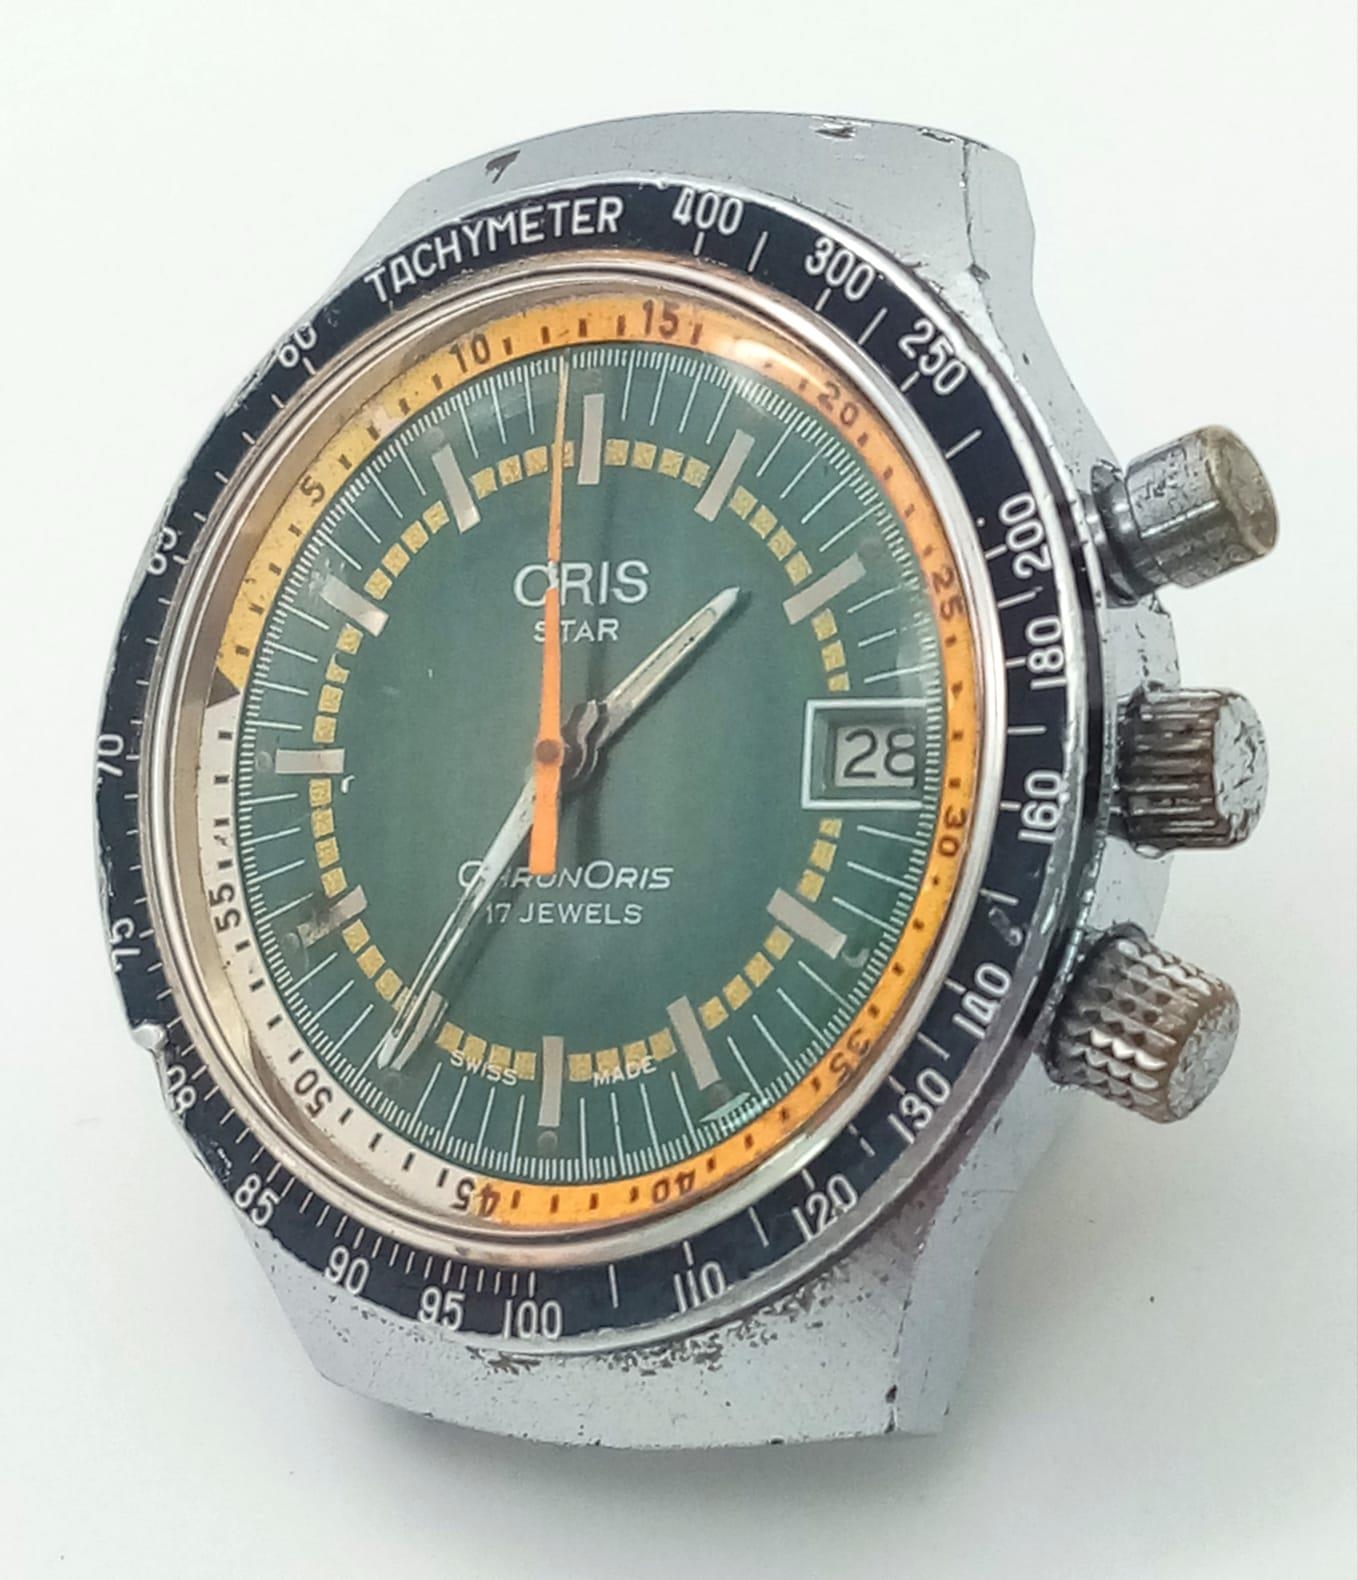 A Vintage Oris Star Chronograph Automatic Gents Watch Case - 38mm. Multi tone dial with date window. - Image 2 of 5